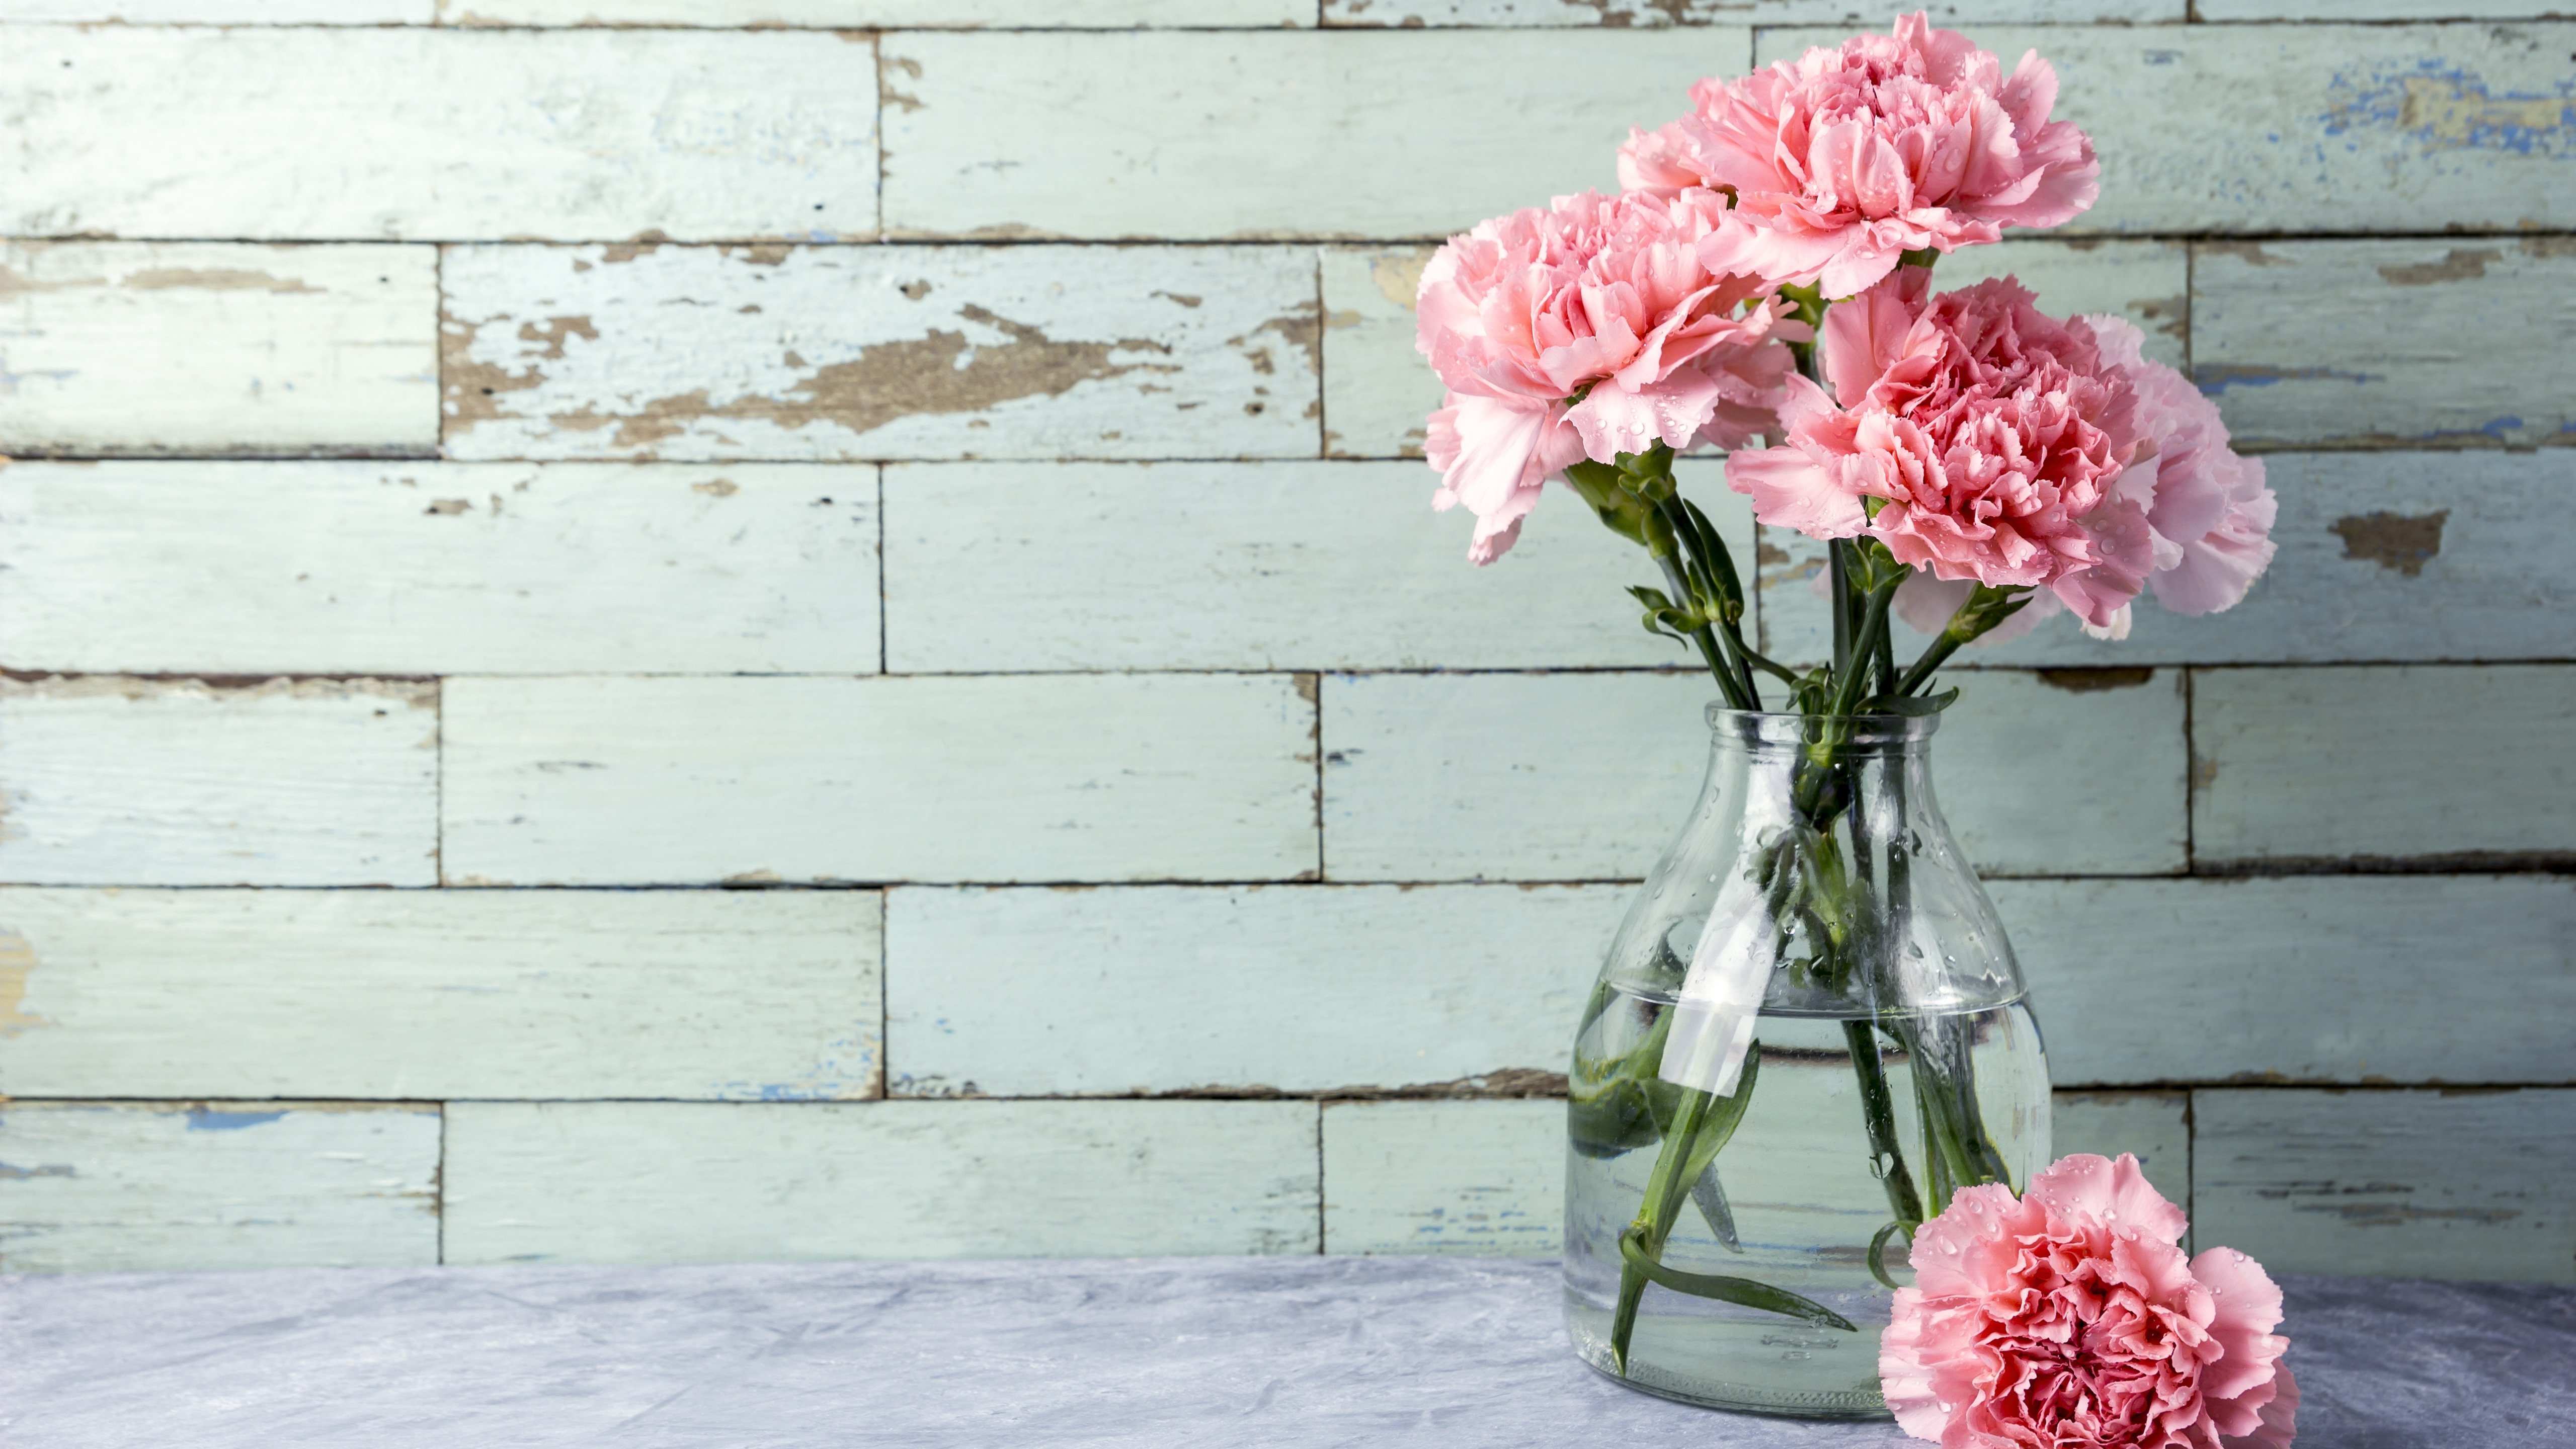 Pink Carnation Wallpapers Wallpaper Cave